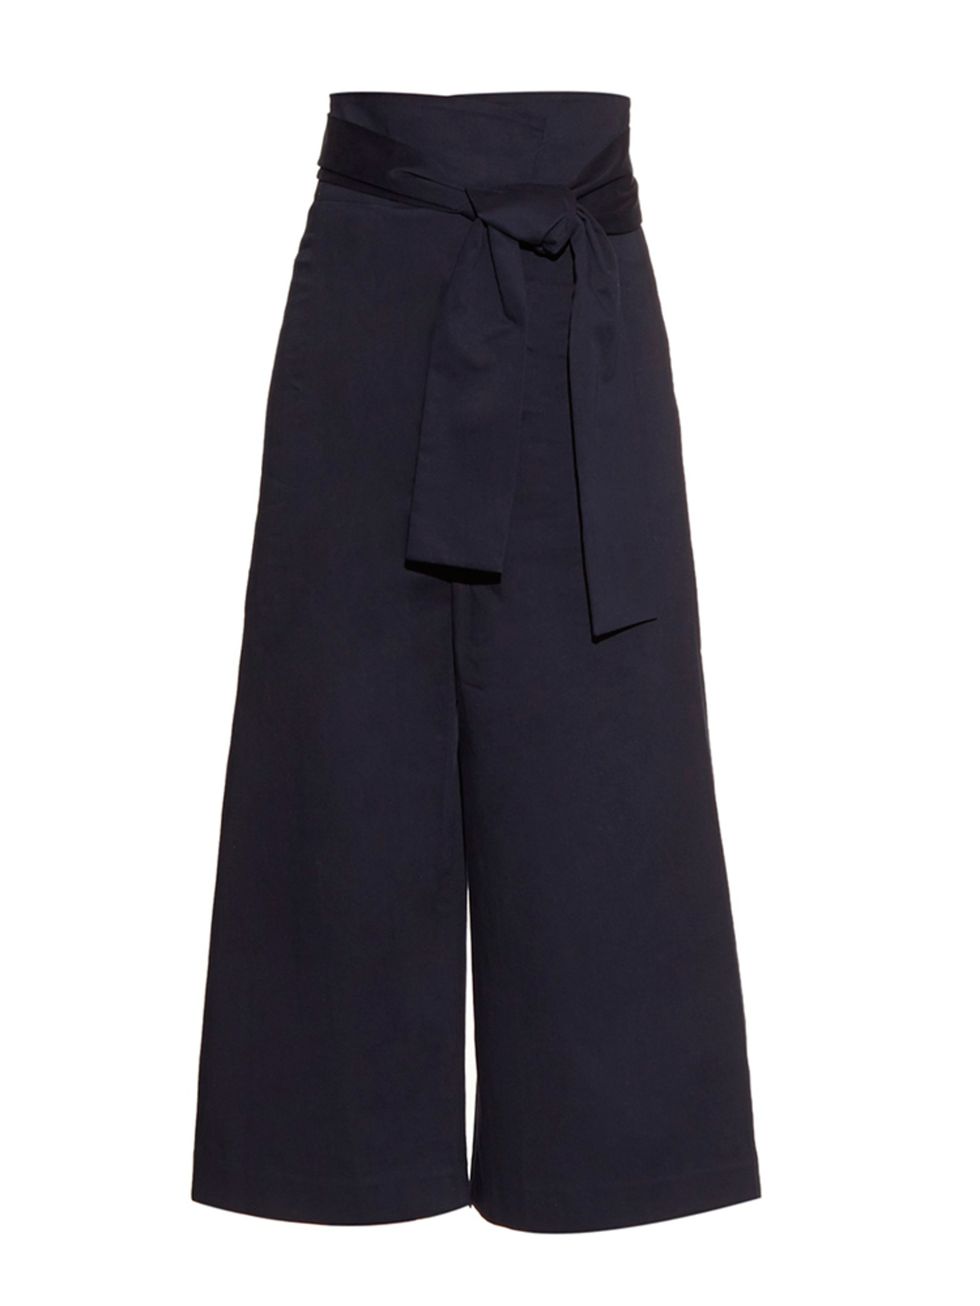 <p>Trousers, £375, Tibi at <a href="http://www.matchesfashion.com/products/Tibi-Paperbag-waist-wide-leg-trousers-1039105" target="_blank">Matches</a> </p>